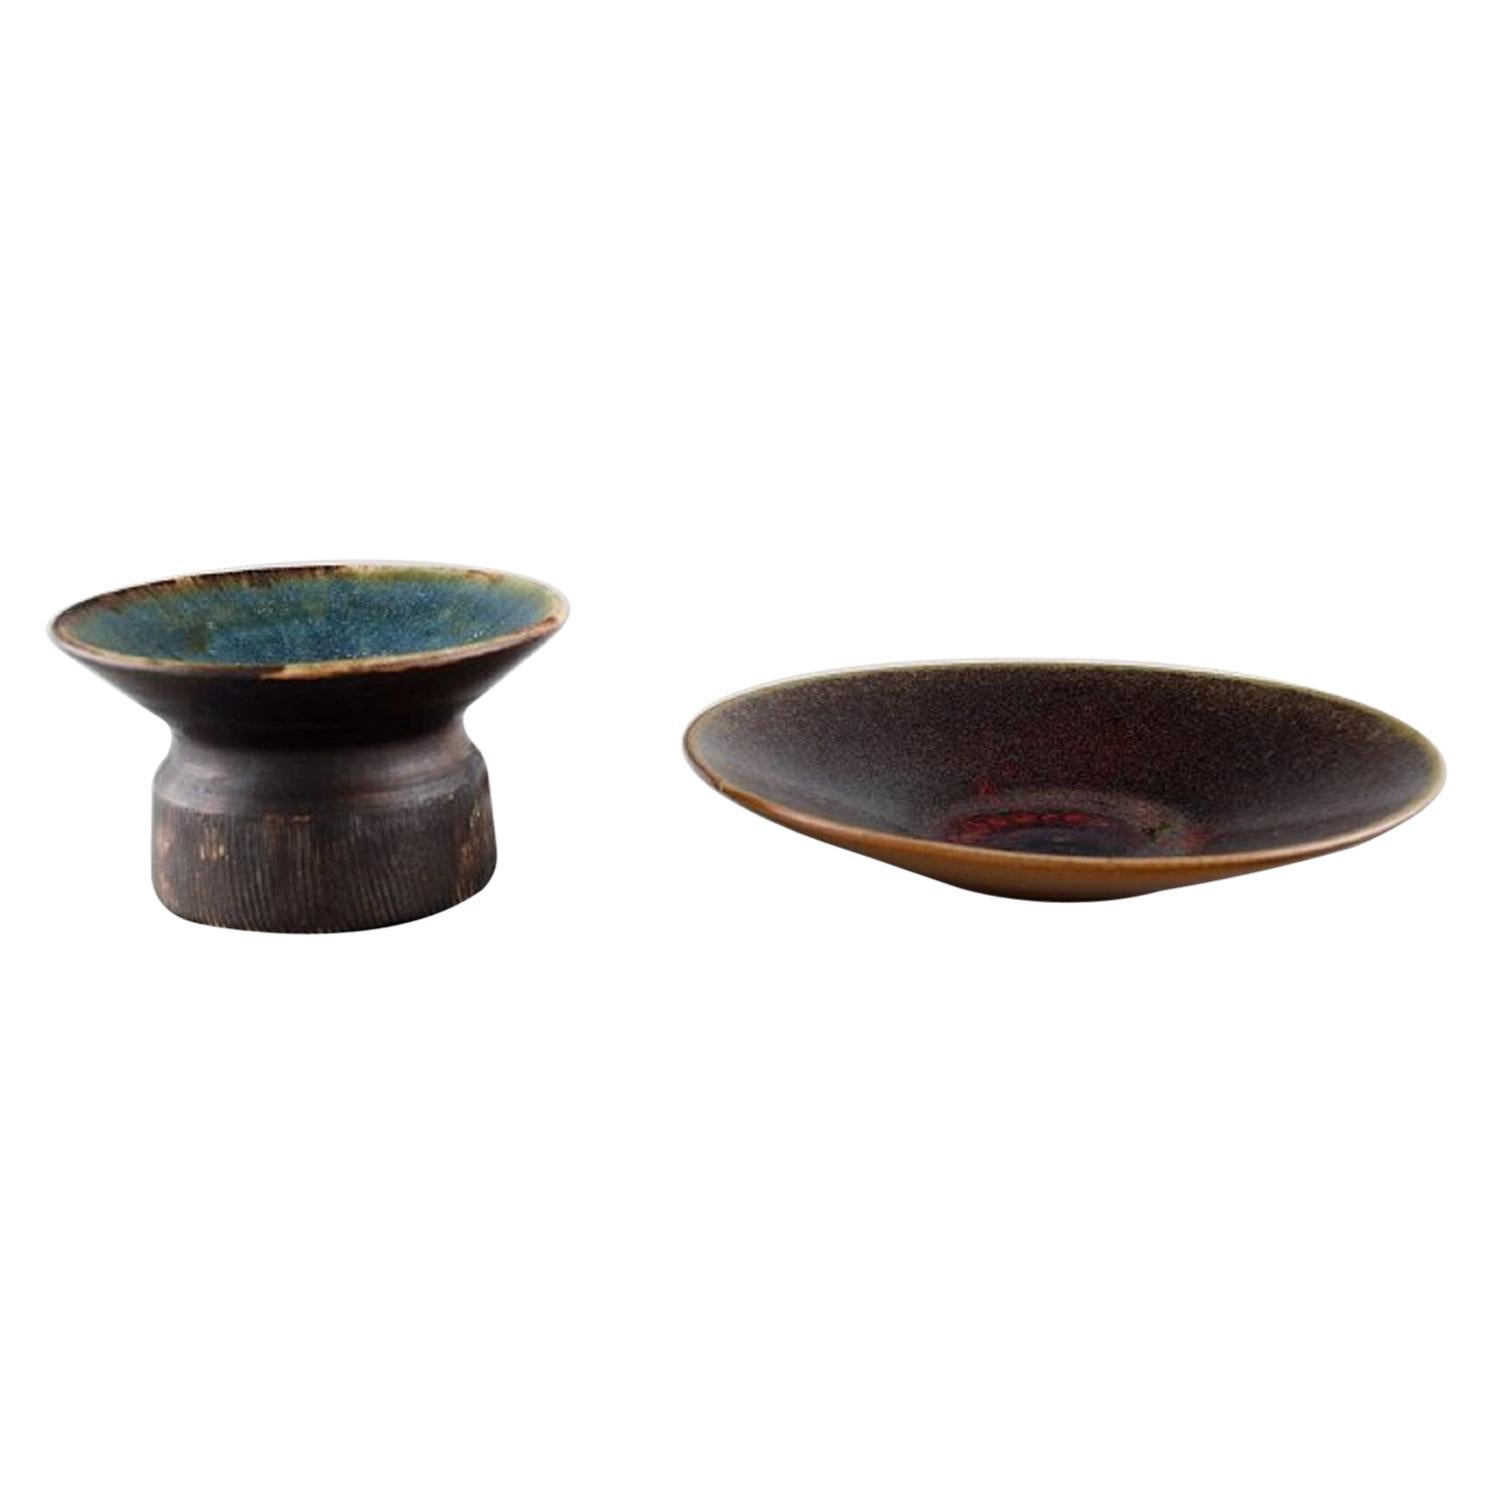 Henning Nilsson for Höganäs, Candlestick and Dish in Glazed Ceramics, 1960s /70s For Sale